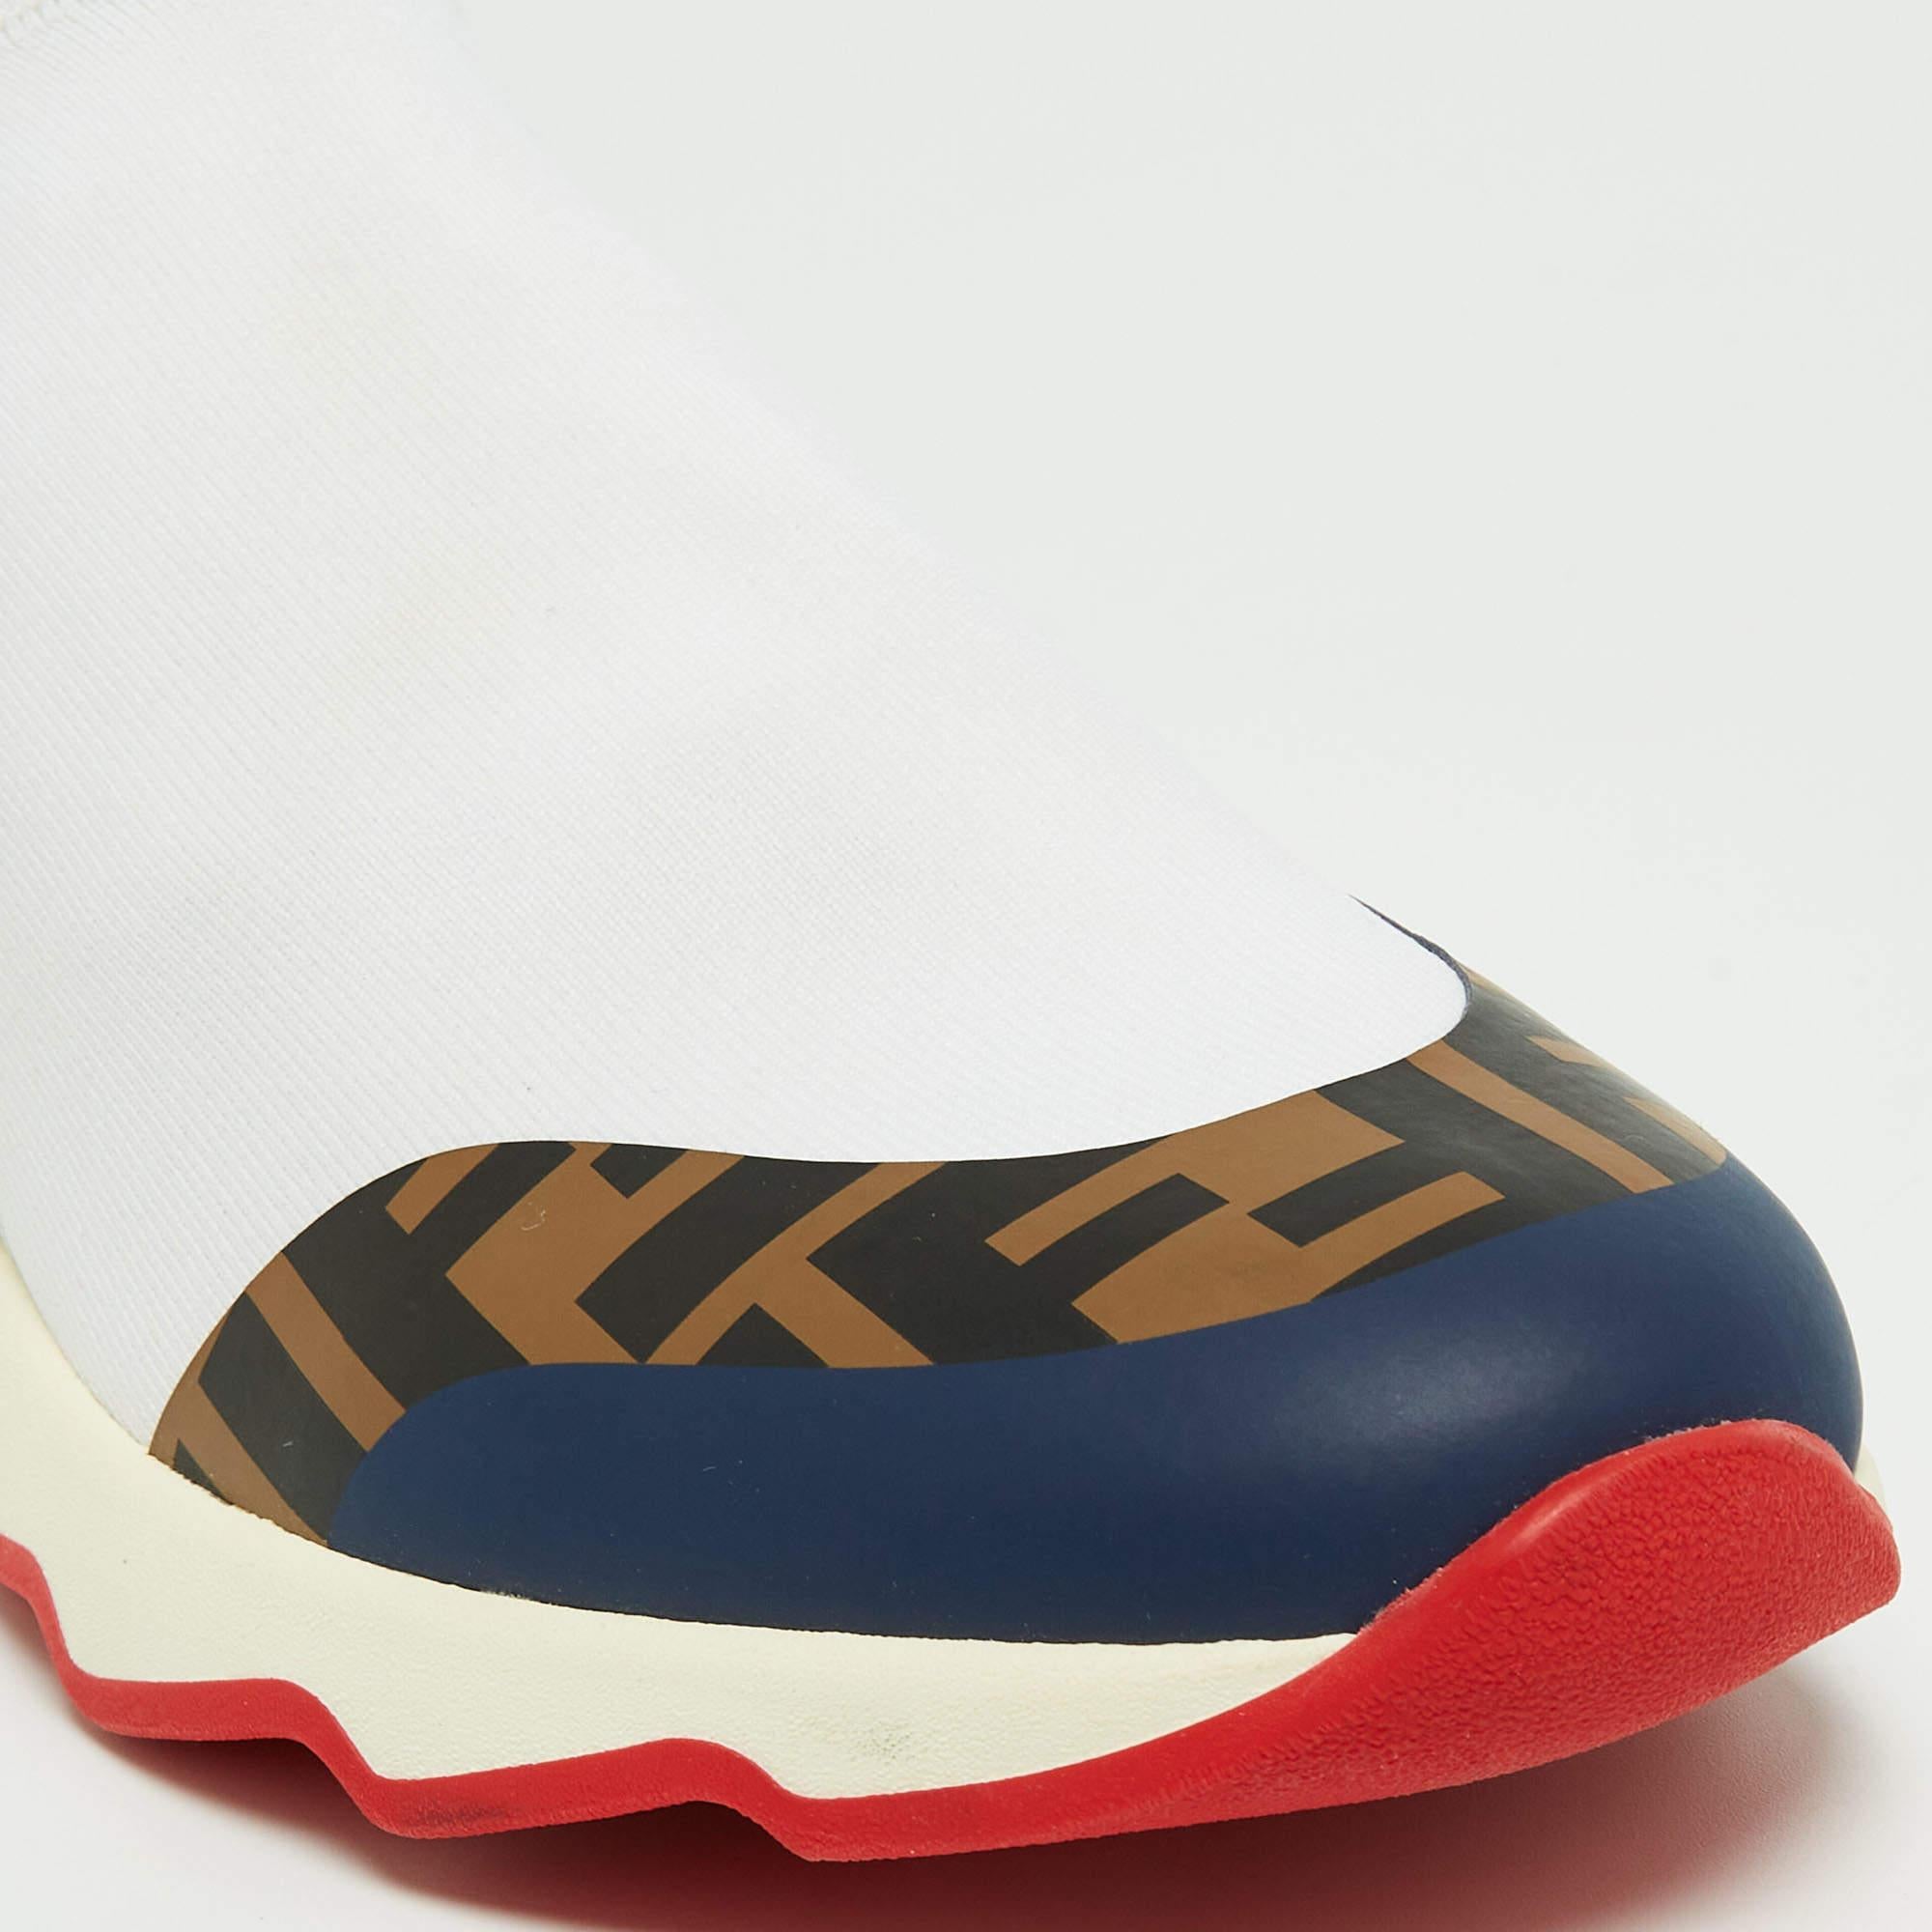 Fendi x Fila Tricolor Knit Fabric and Leather Mania Sock Sneakers Size 38 For Sale 4